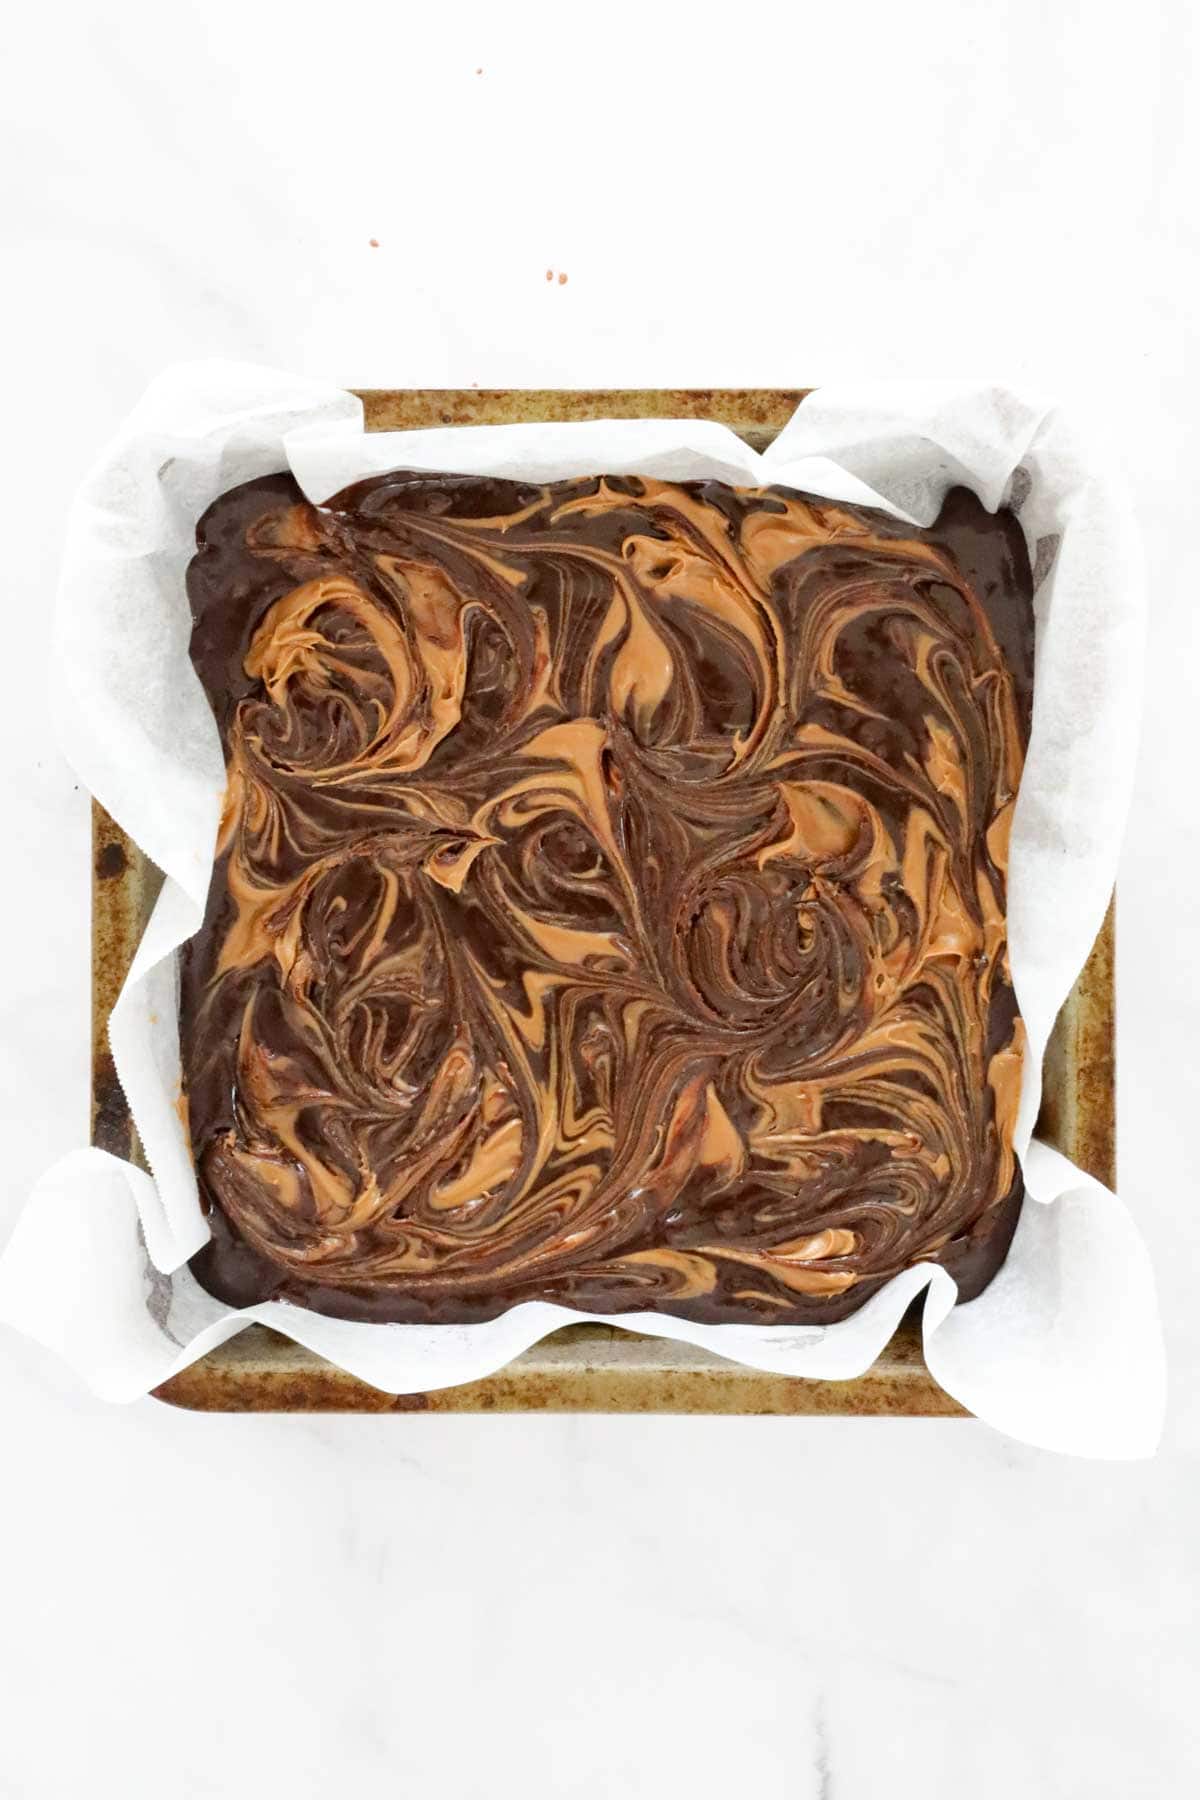 The Biscoff spread swirled through the brownie mixture.